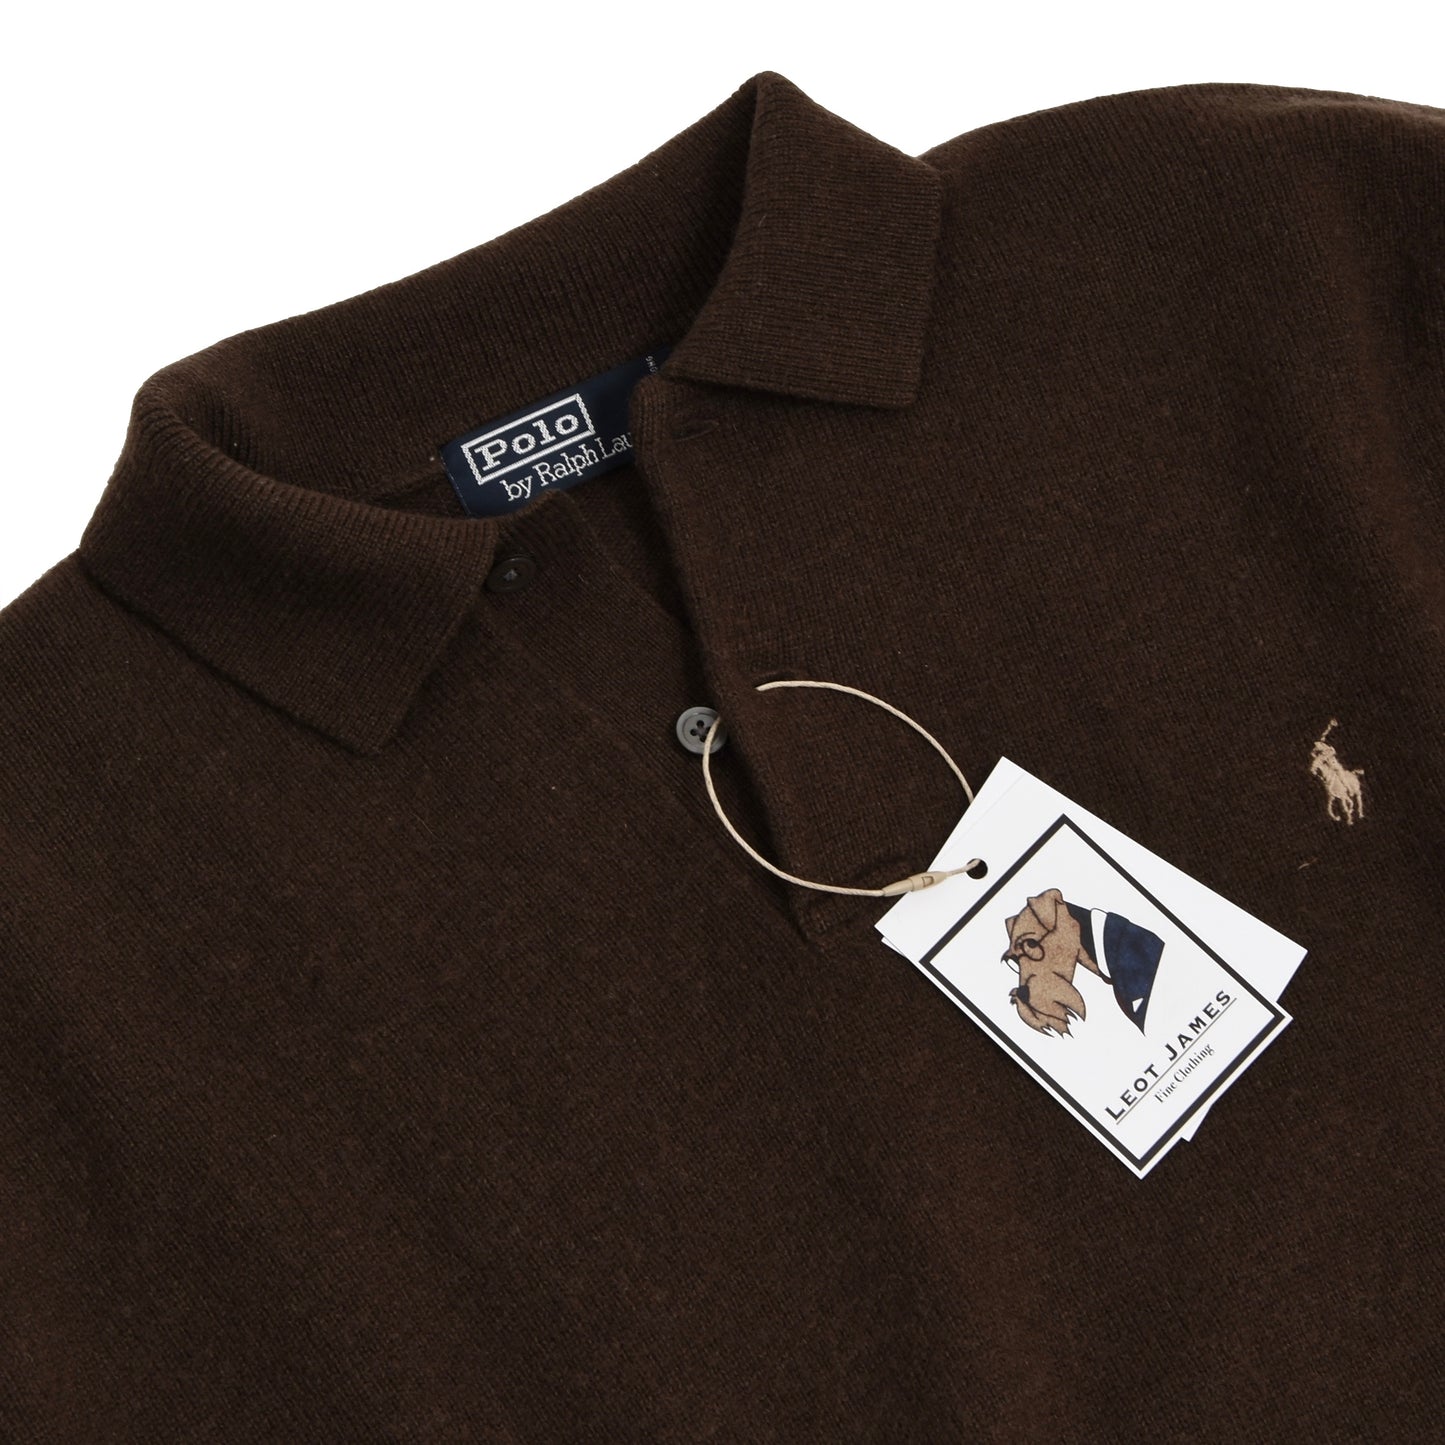 Polo Ralph Lauren Lambswool Polo Sweater Size M - Chocolate Brown